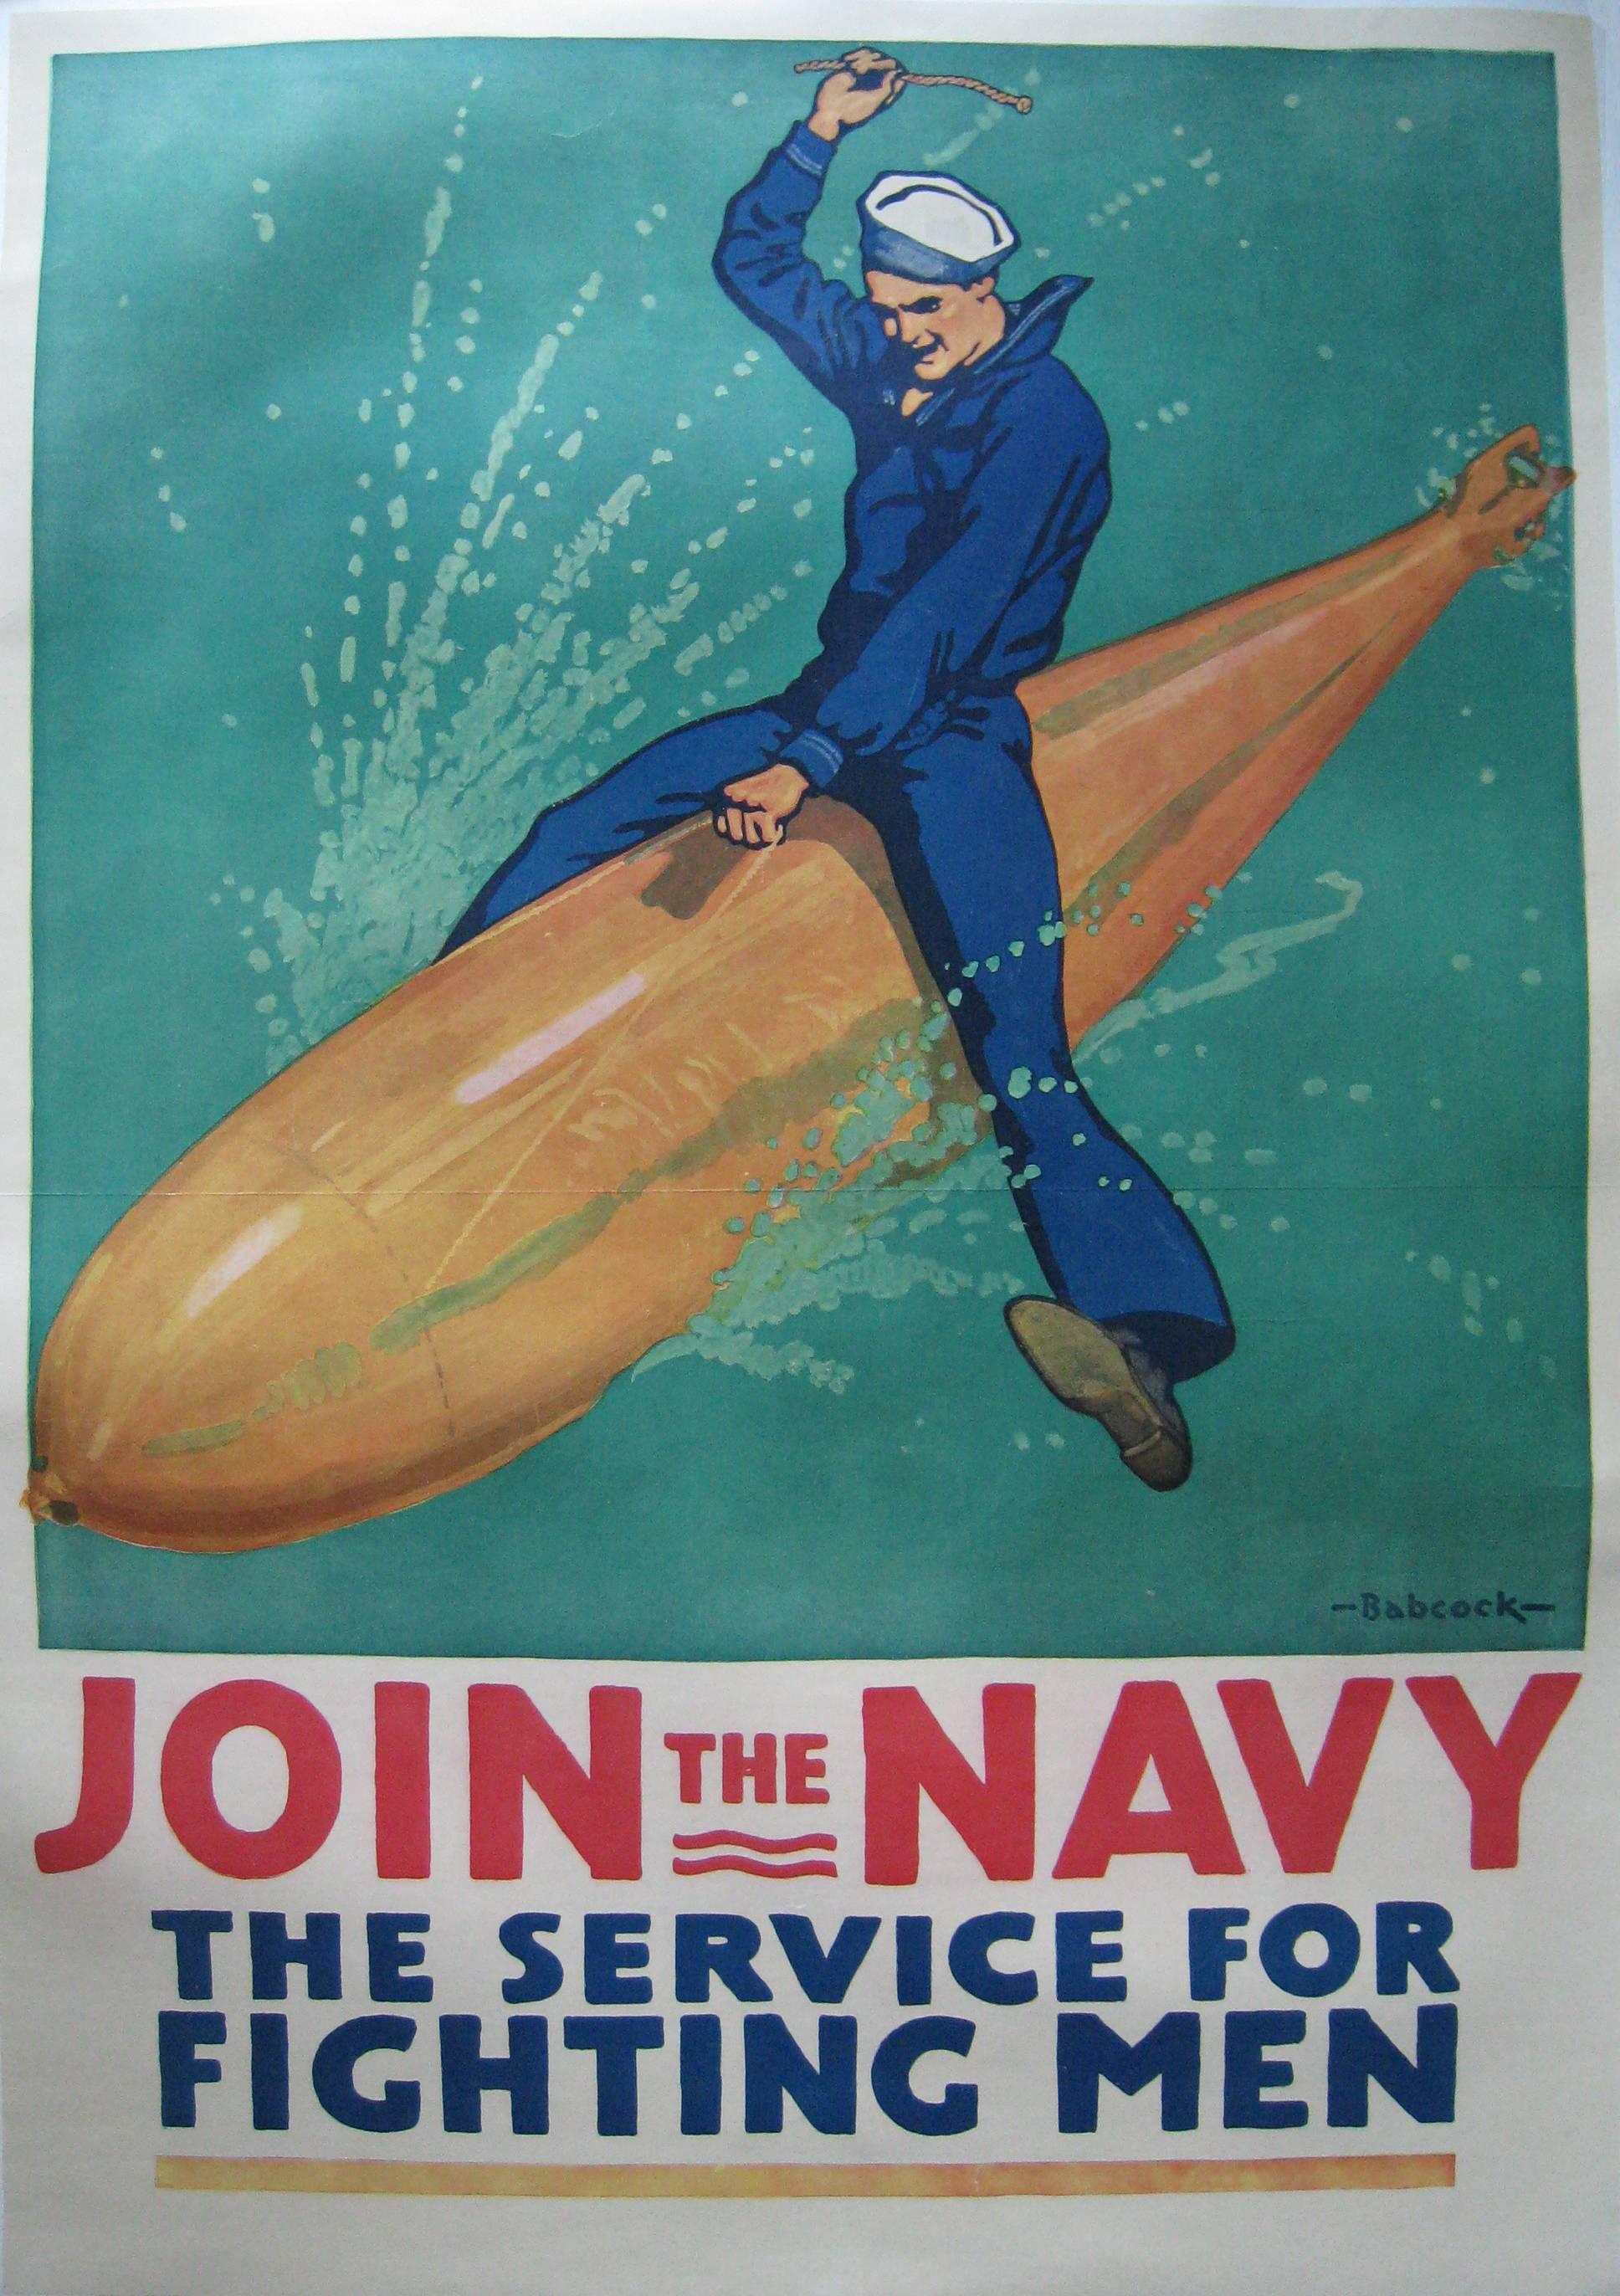 Join the Navy The Service for Fighting Men  - Print by Babcock, Richard Fayerweather